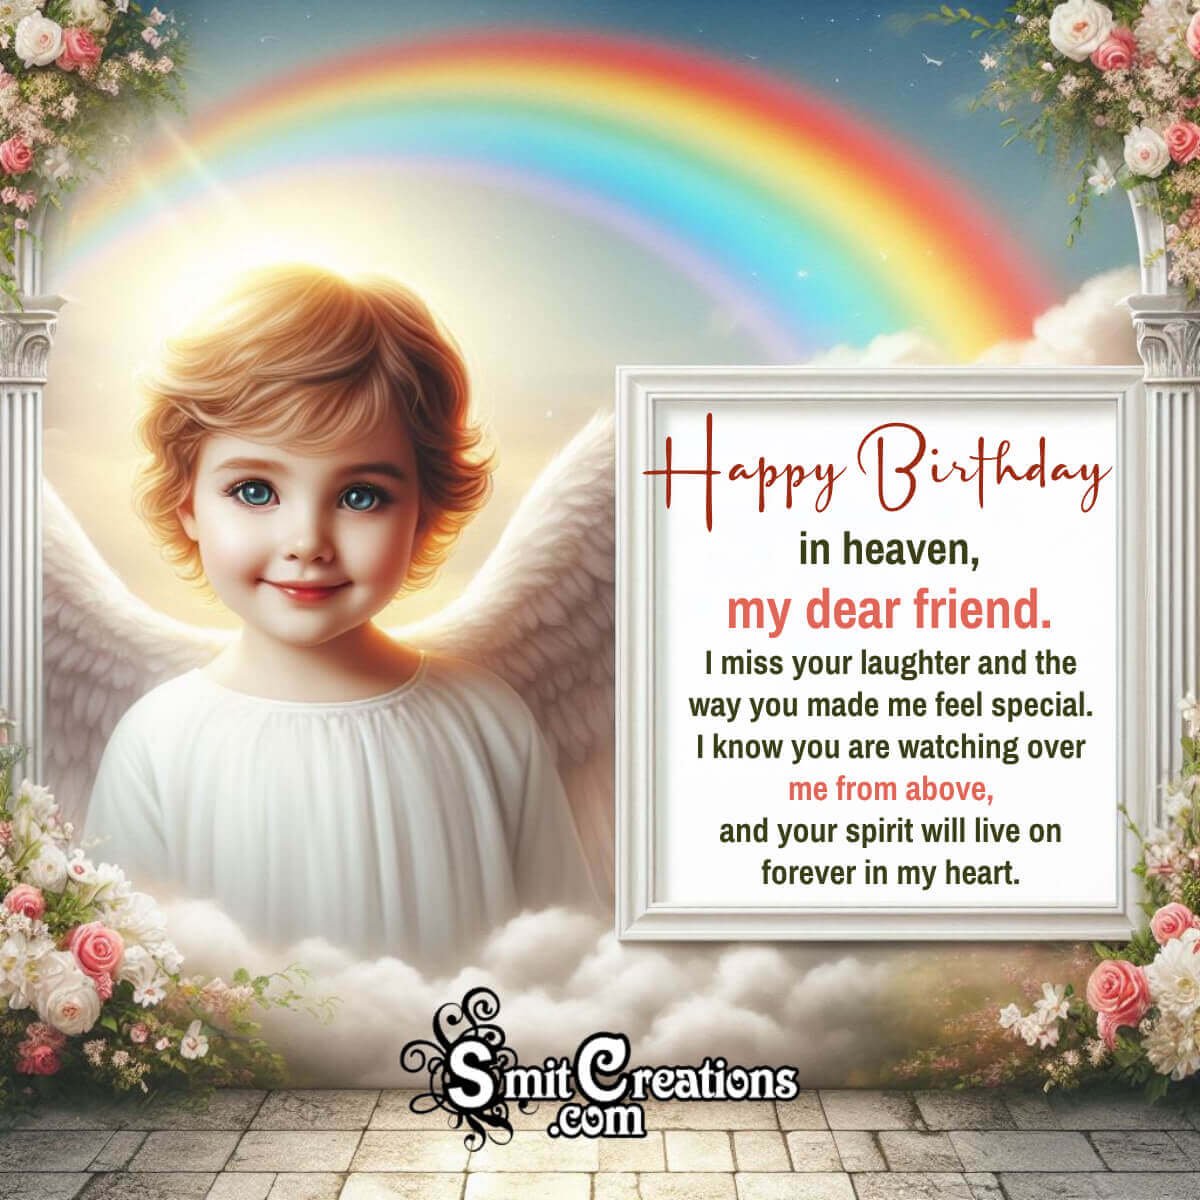 100+ Heavenly Birthday Wishes - Smit Creations – Your Daily Dose of Fun.